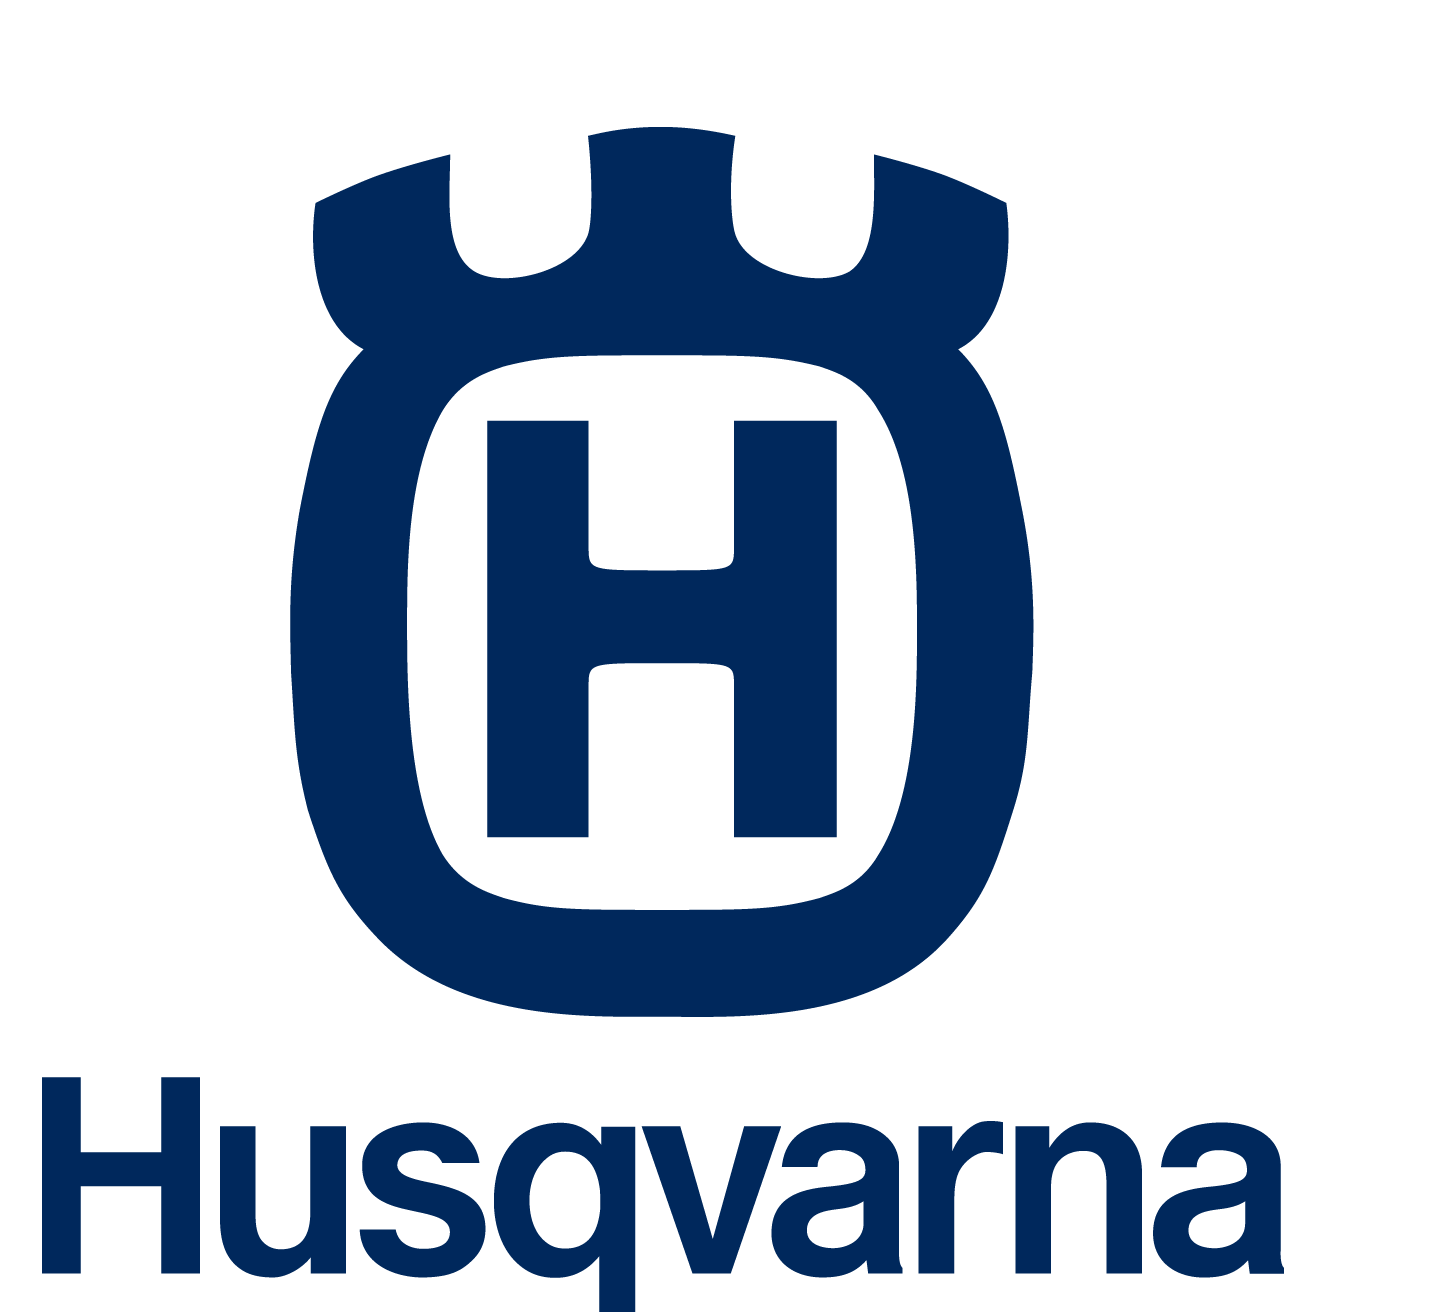 We ride and race Husqvarna motorcycles!